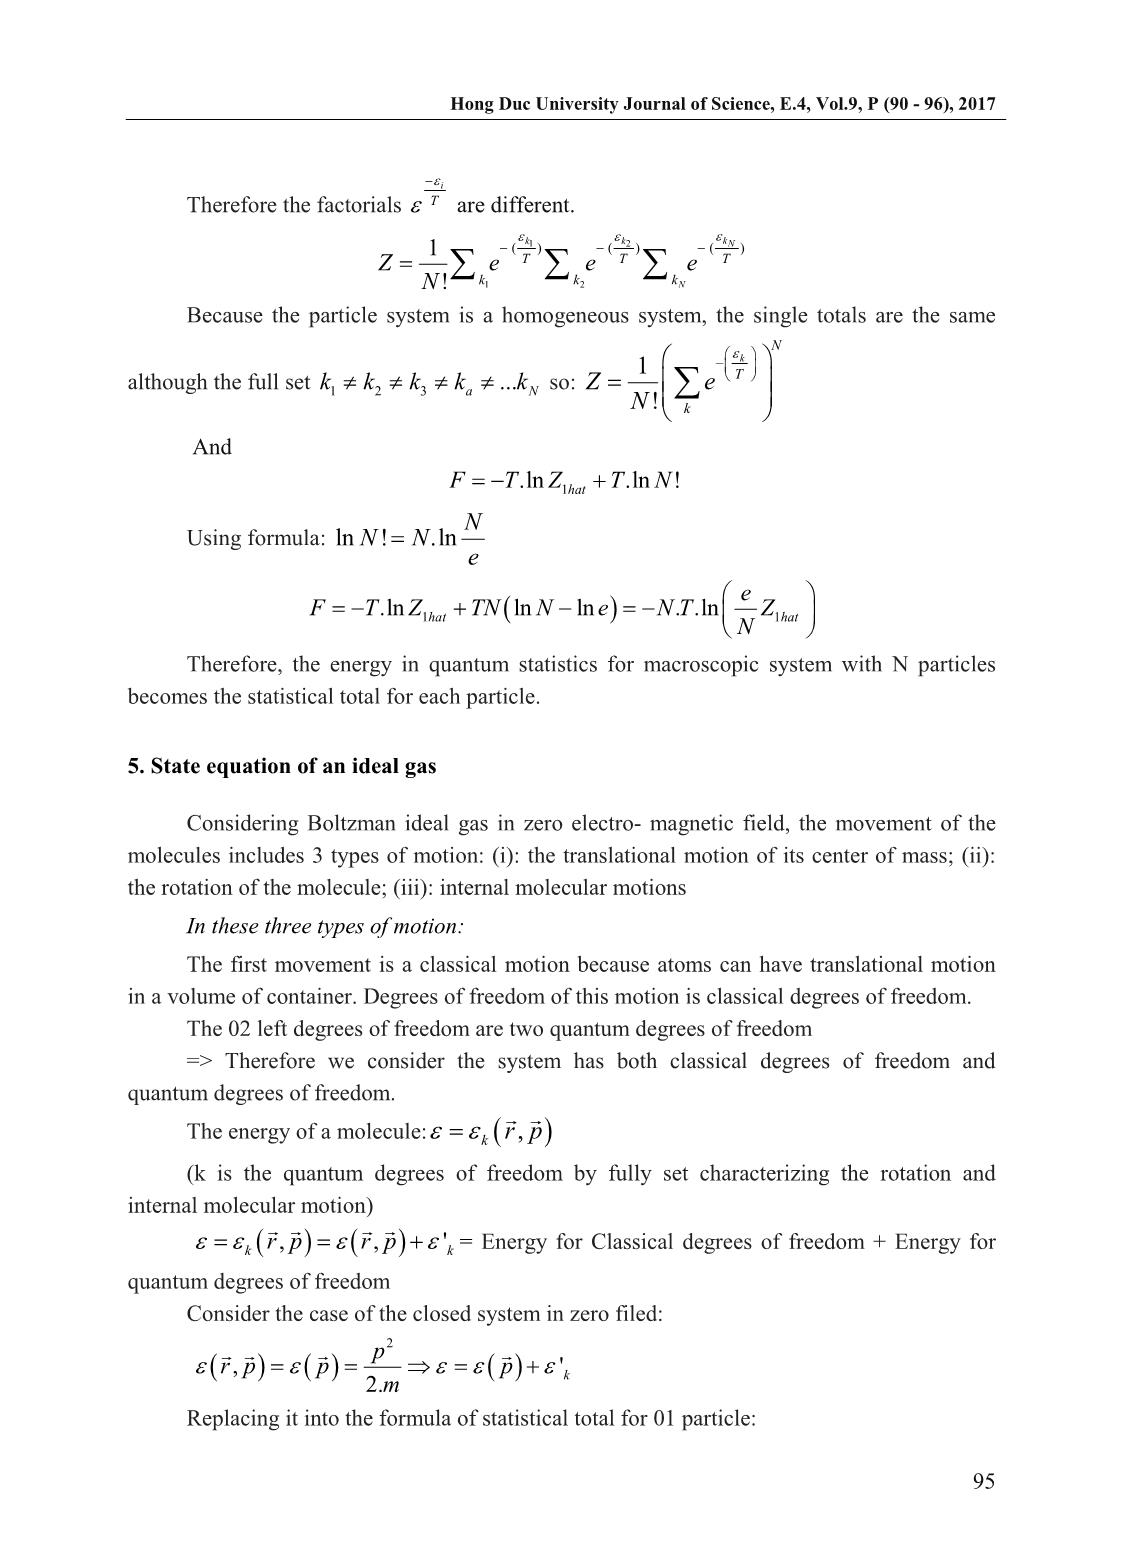 Study boltzman distribution function for ideal gas system trang 6